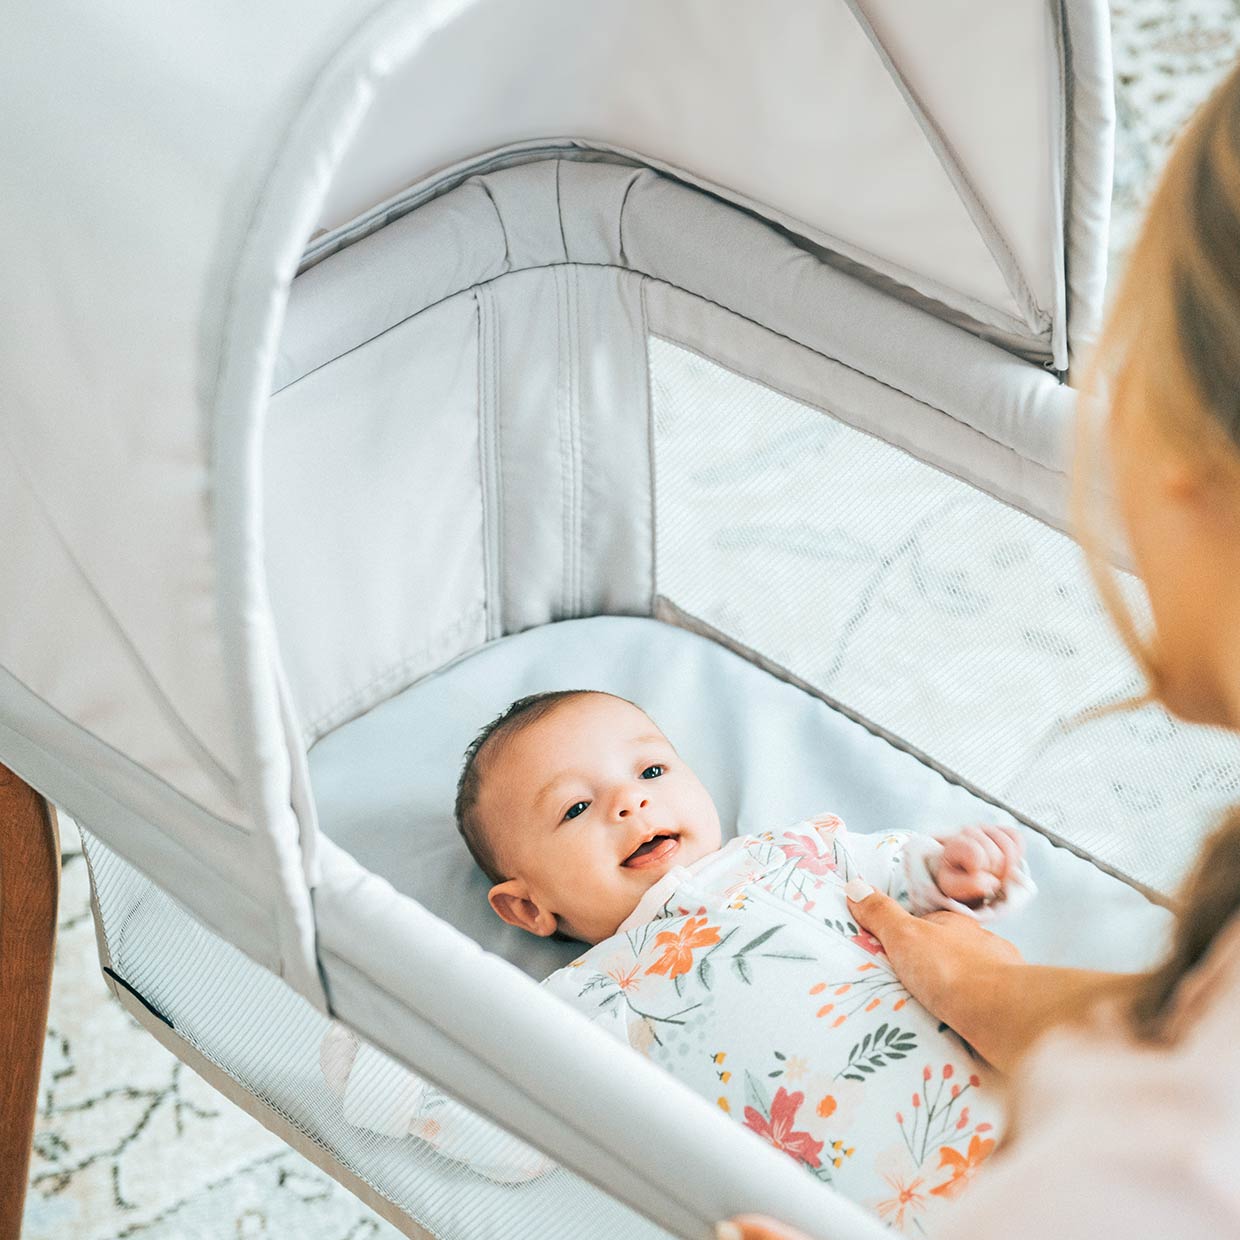 How Long Can a Baby Sleep in a Bassinet?